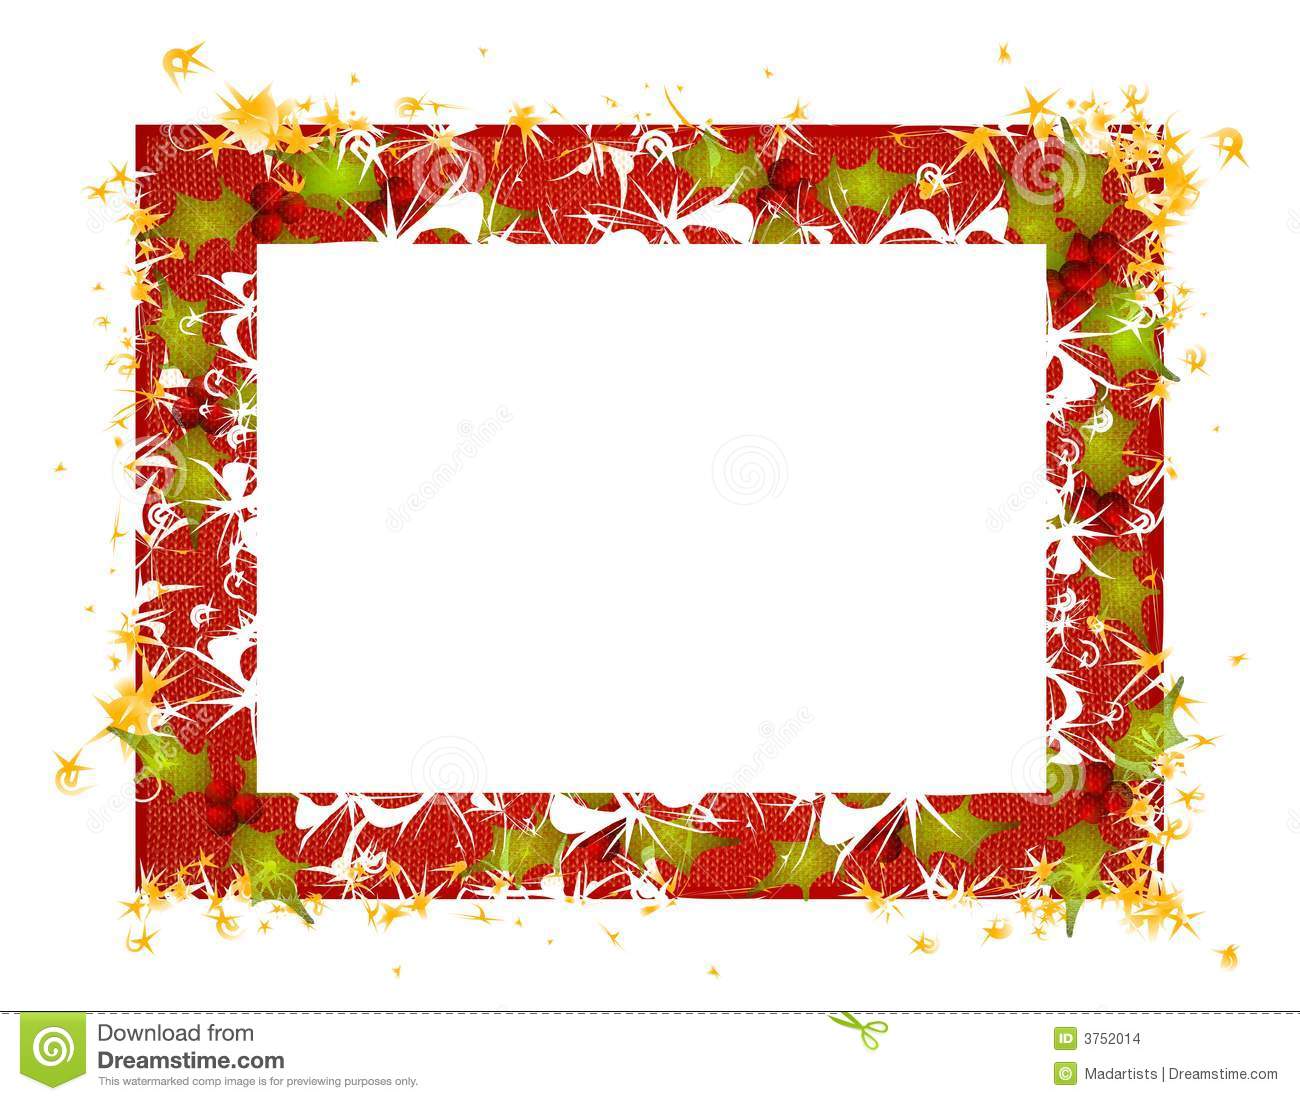 Clip Art Illustration Featuring A Decorative Rustic Looking Christmas